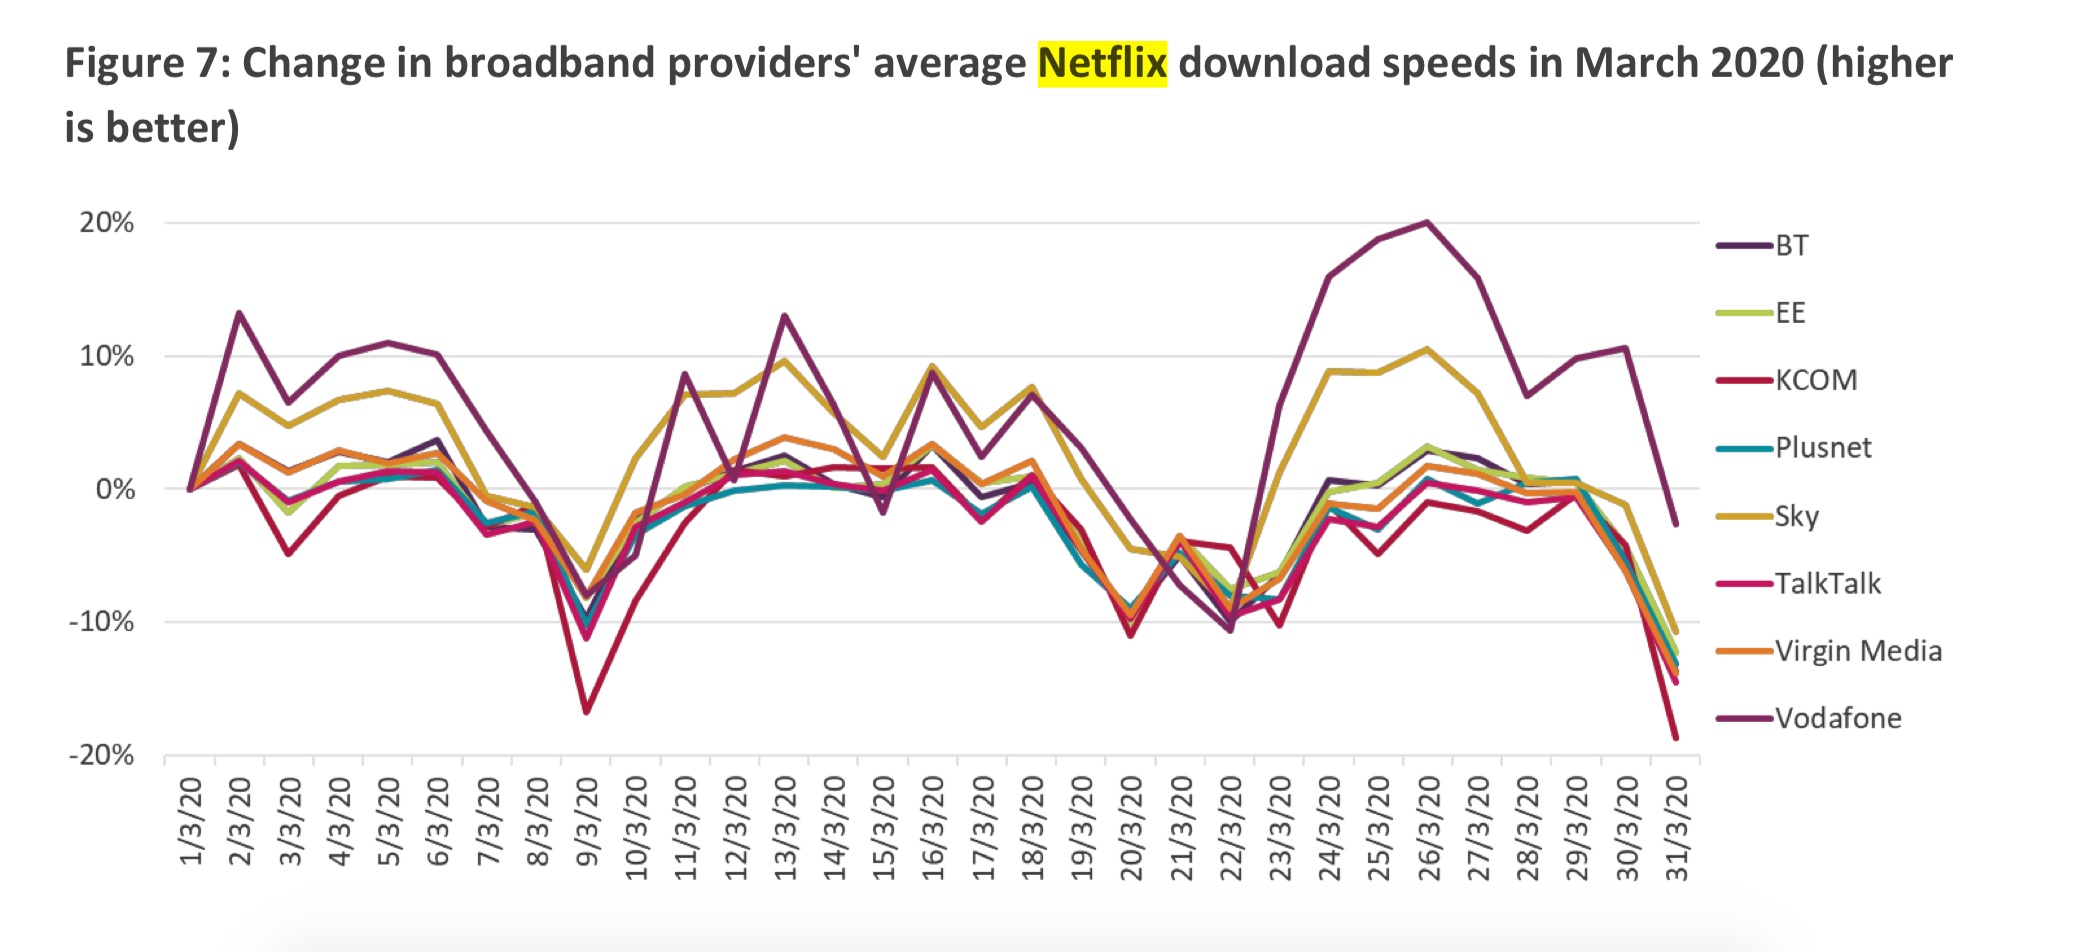 A graph showing change in broadband providers average Netflix download speeds